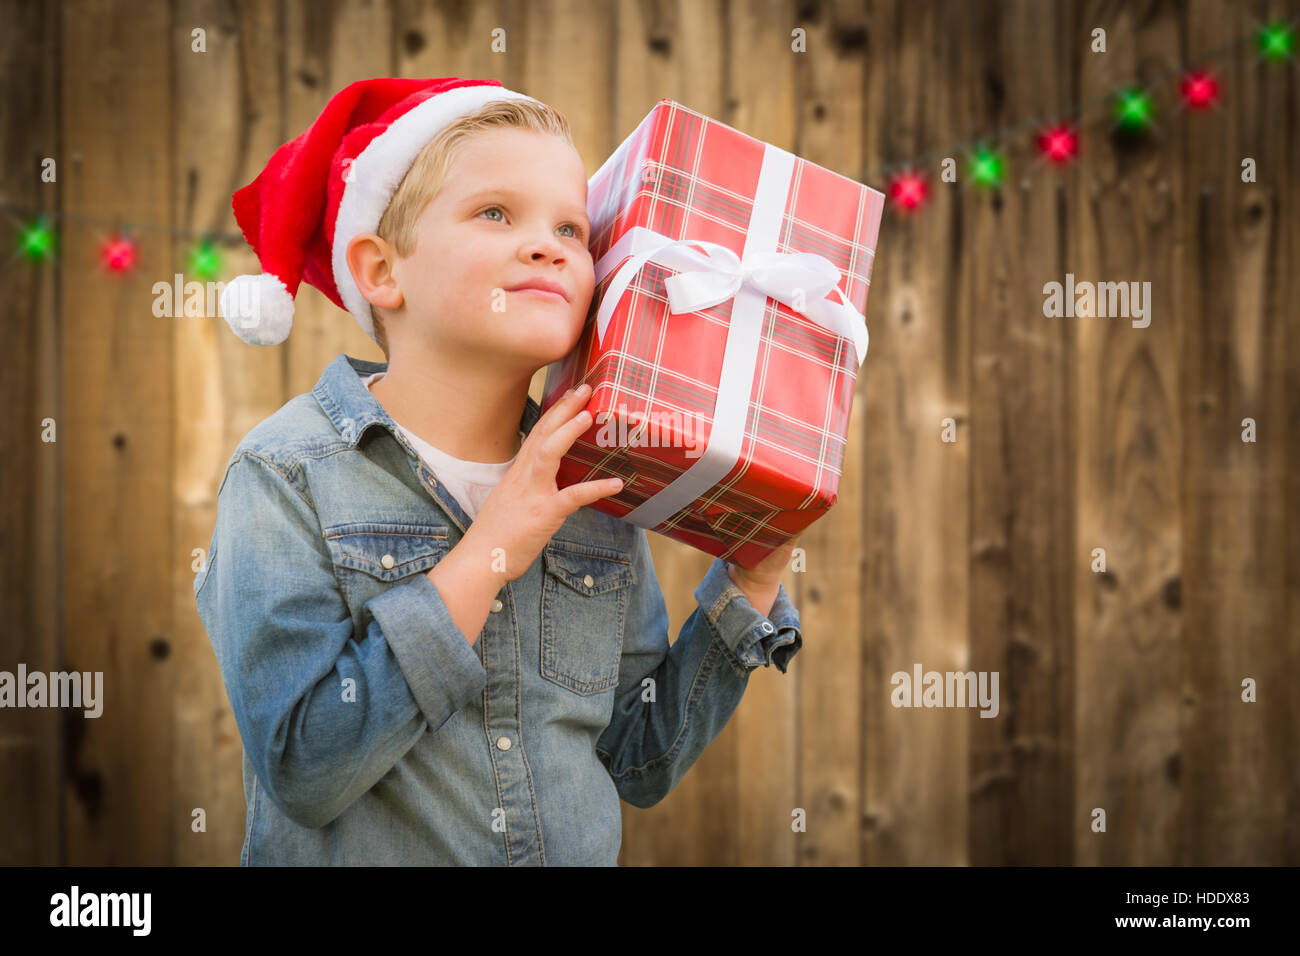 Curious Young Boy Wearing Santa Hat Holding Christmas Gift On A Wood Fence Background. Stock Photo